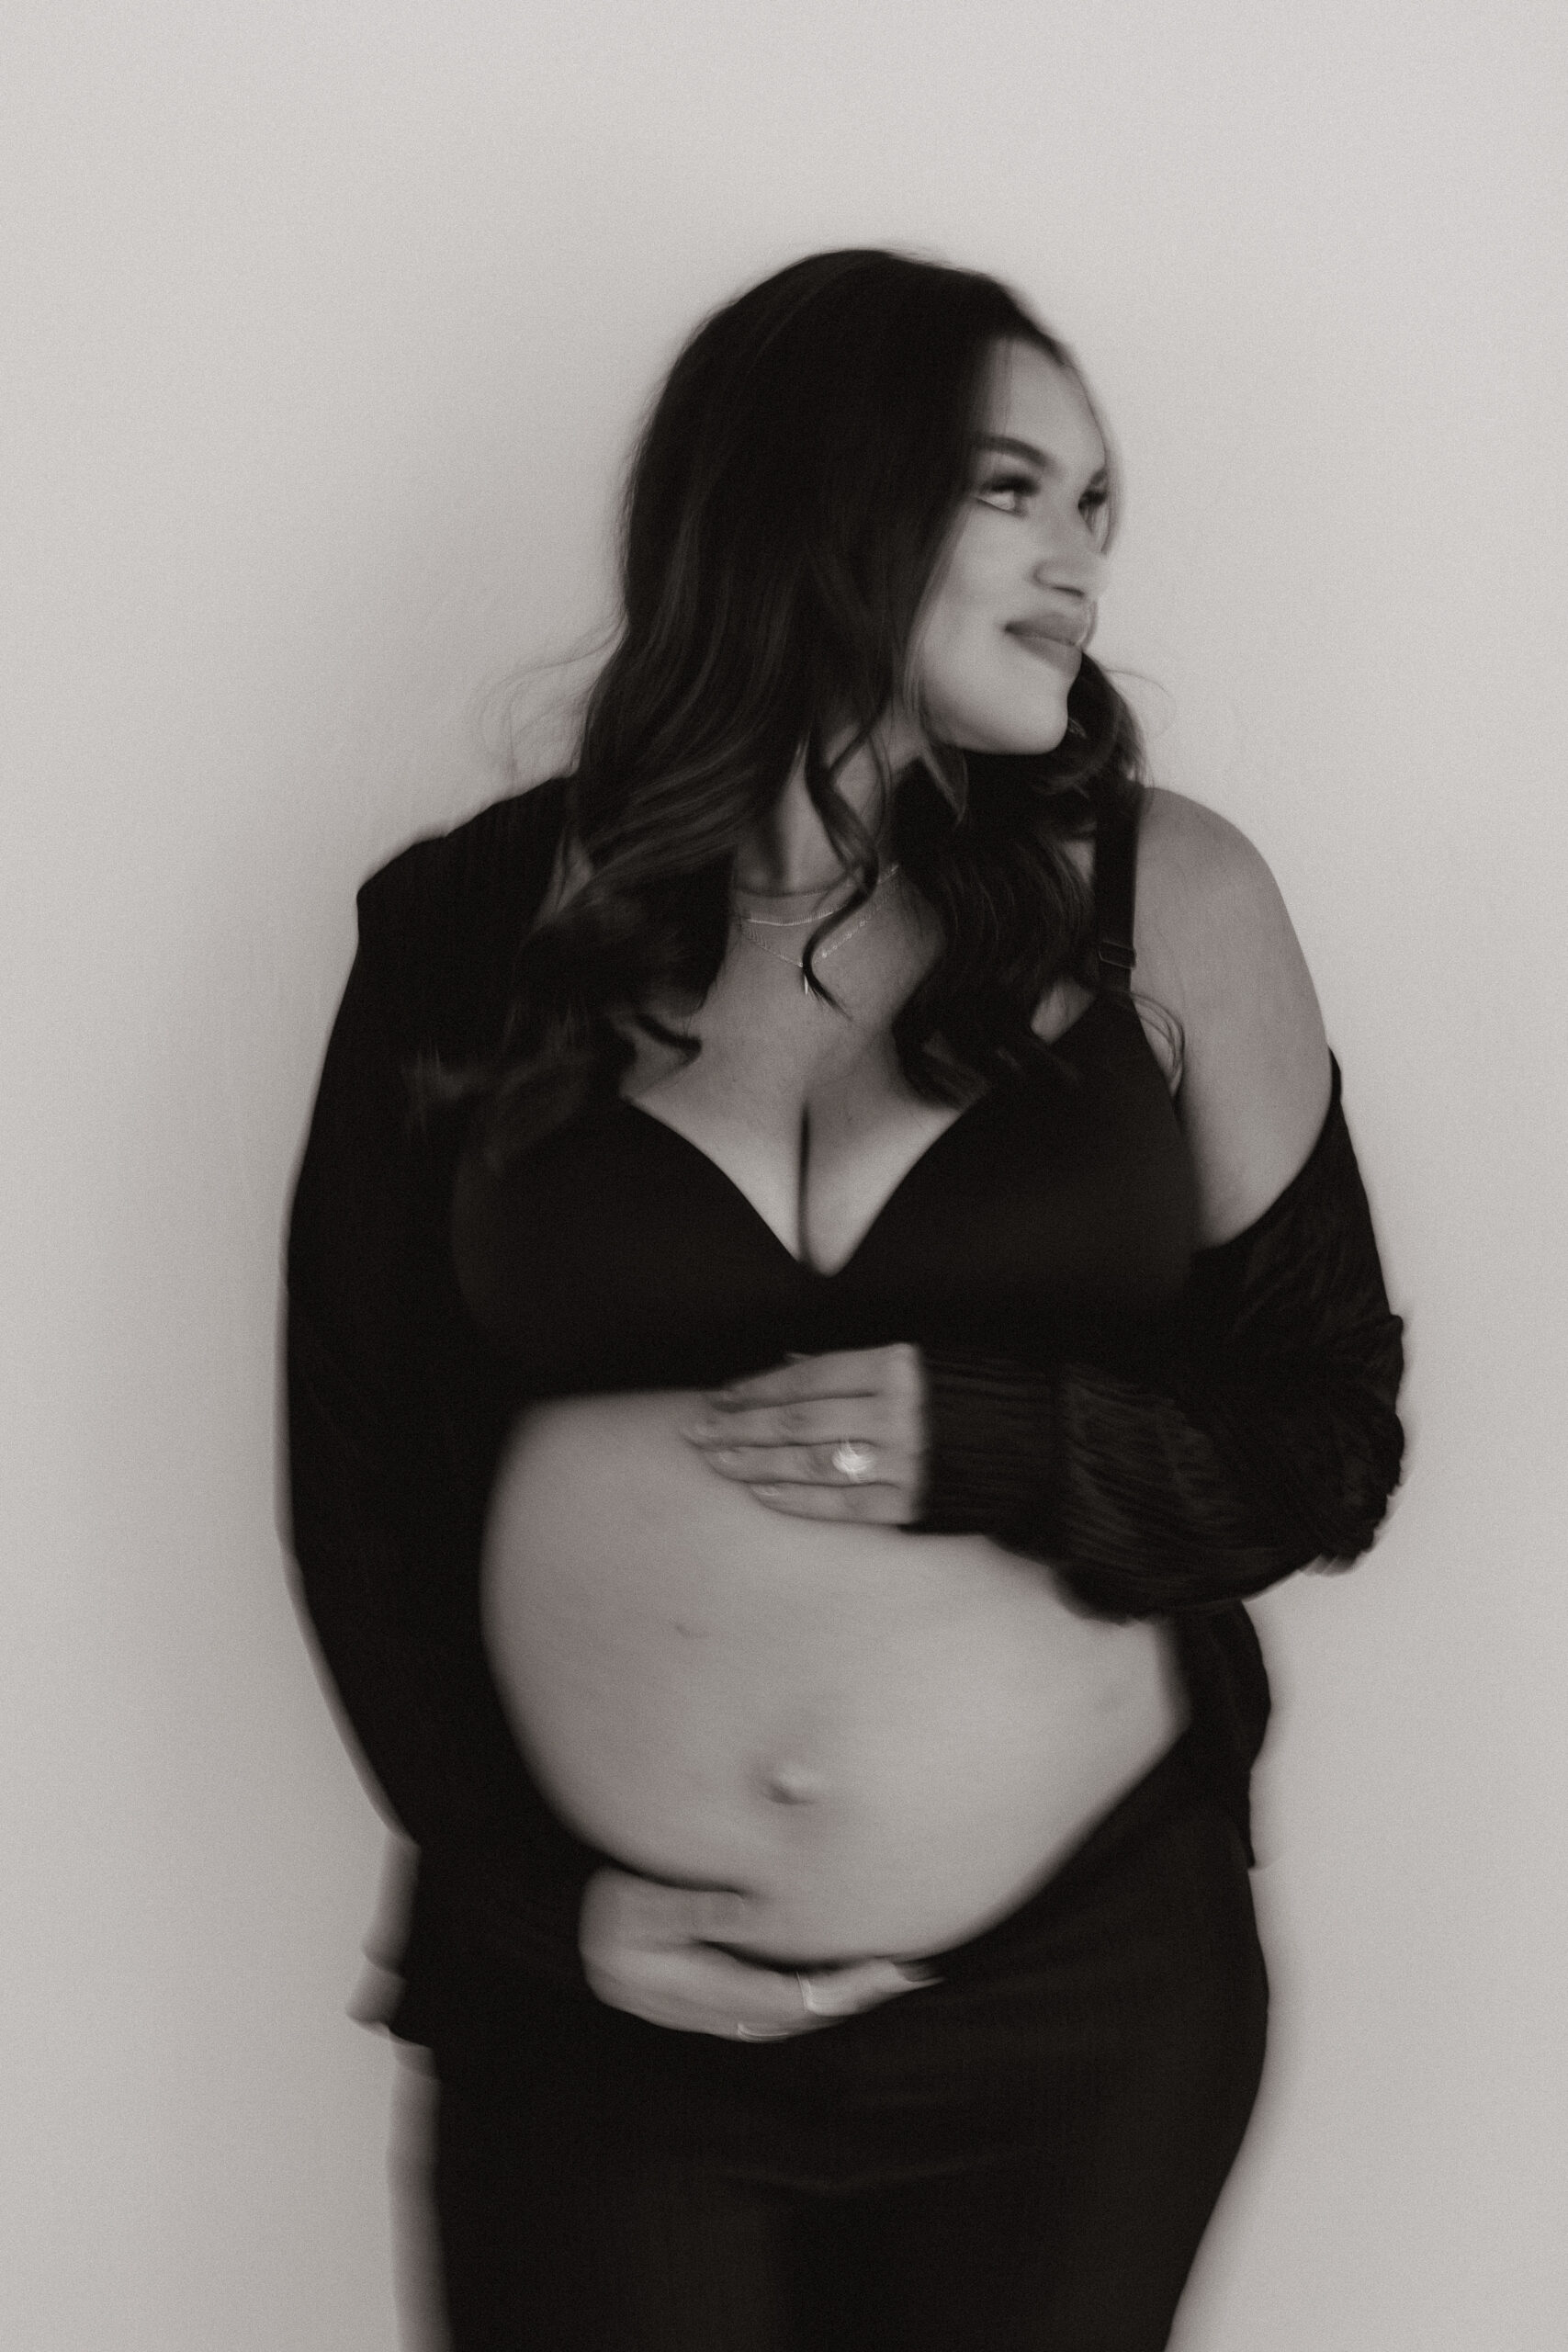 blurry photo of mom to be holding her stomach during editorial maternity photoshoot